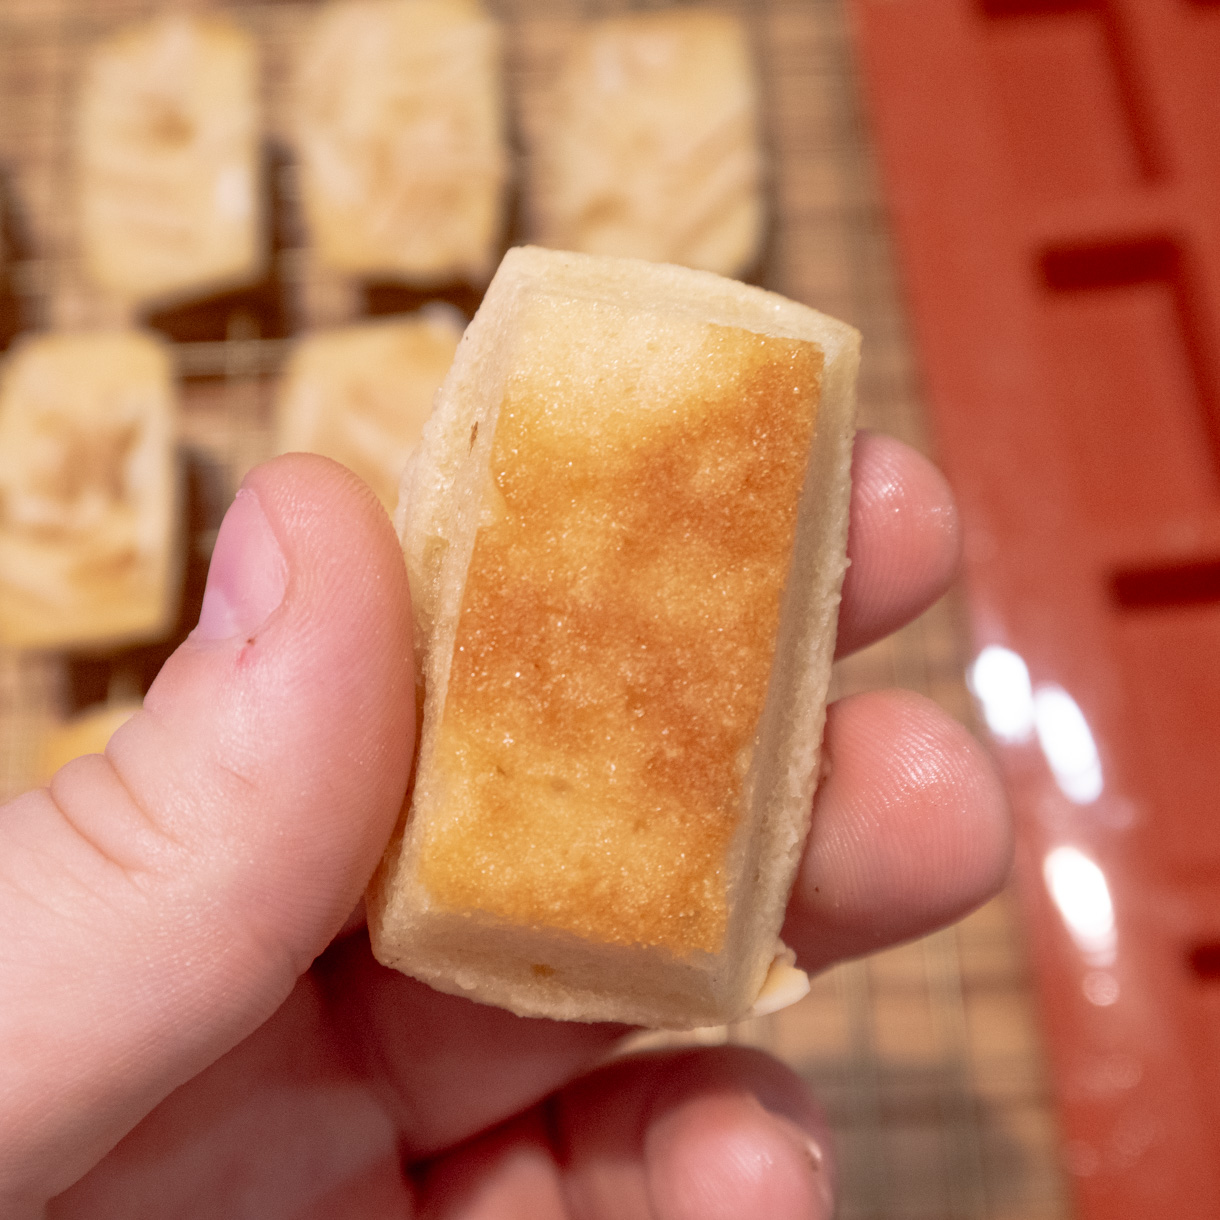 Financier held up upside down to show the golden colour on the underside of the baked good.